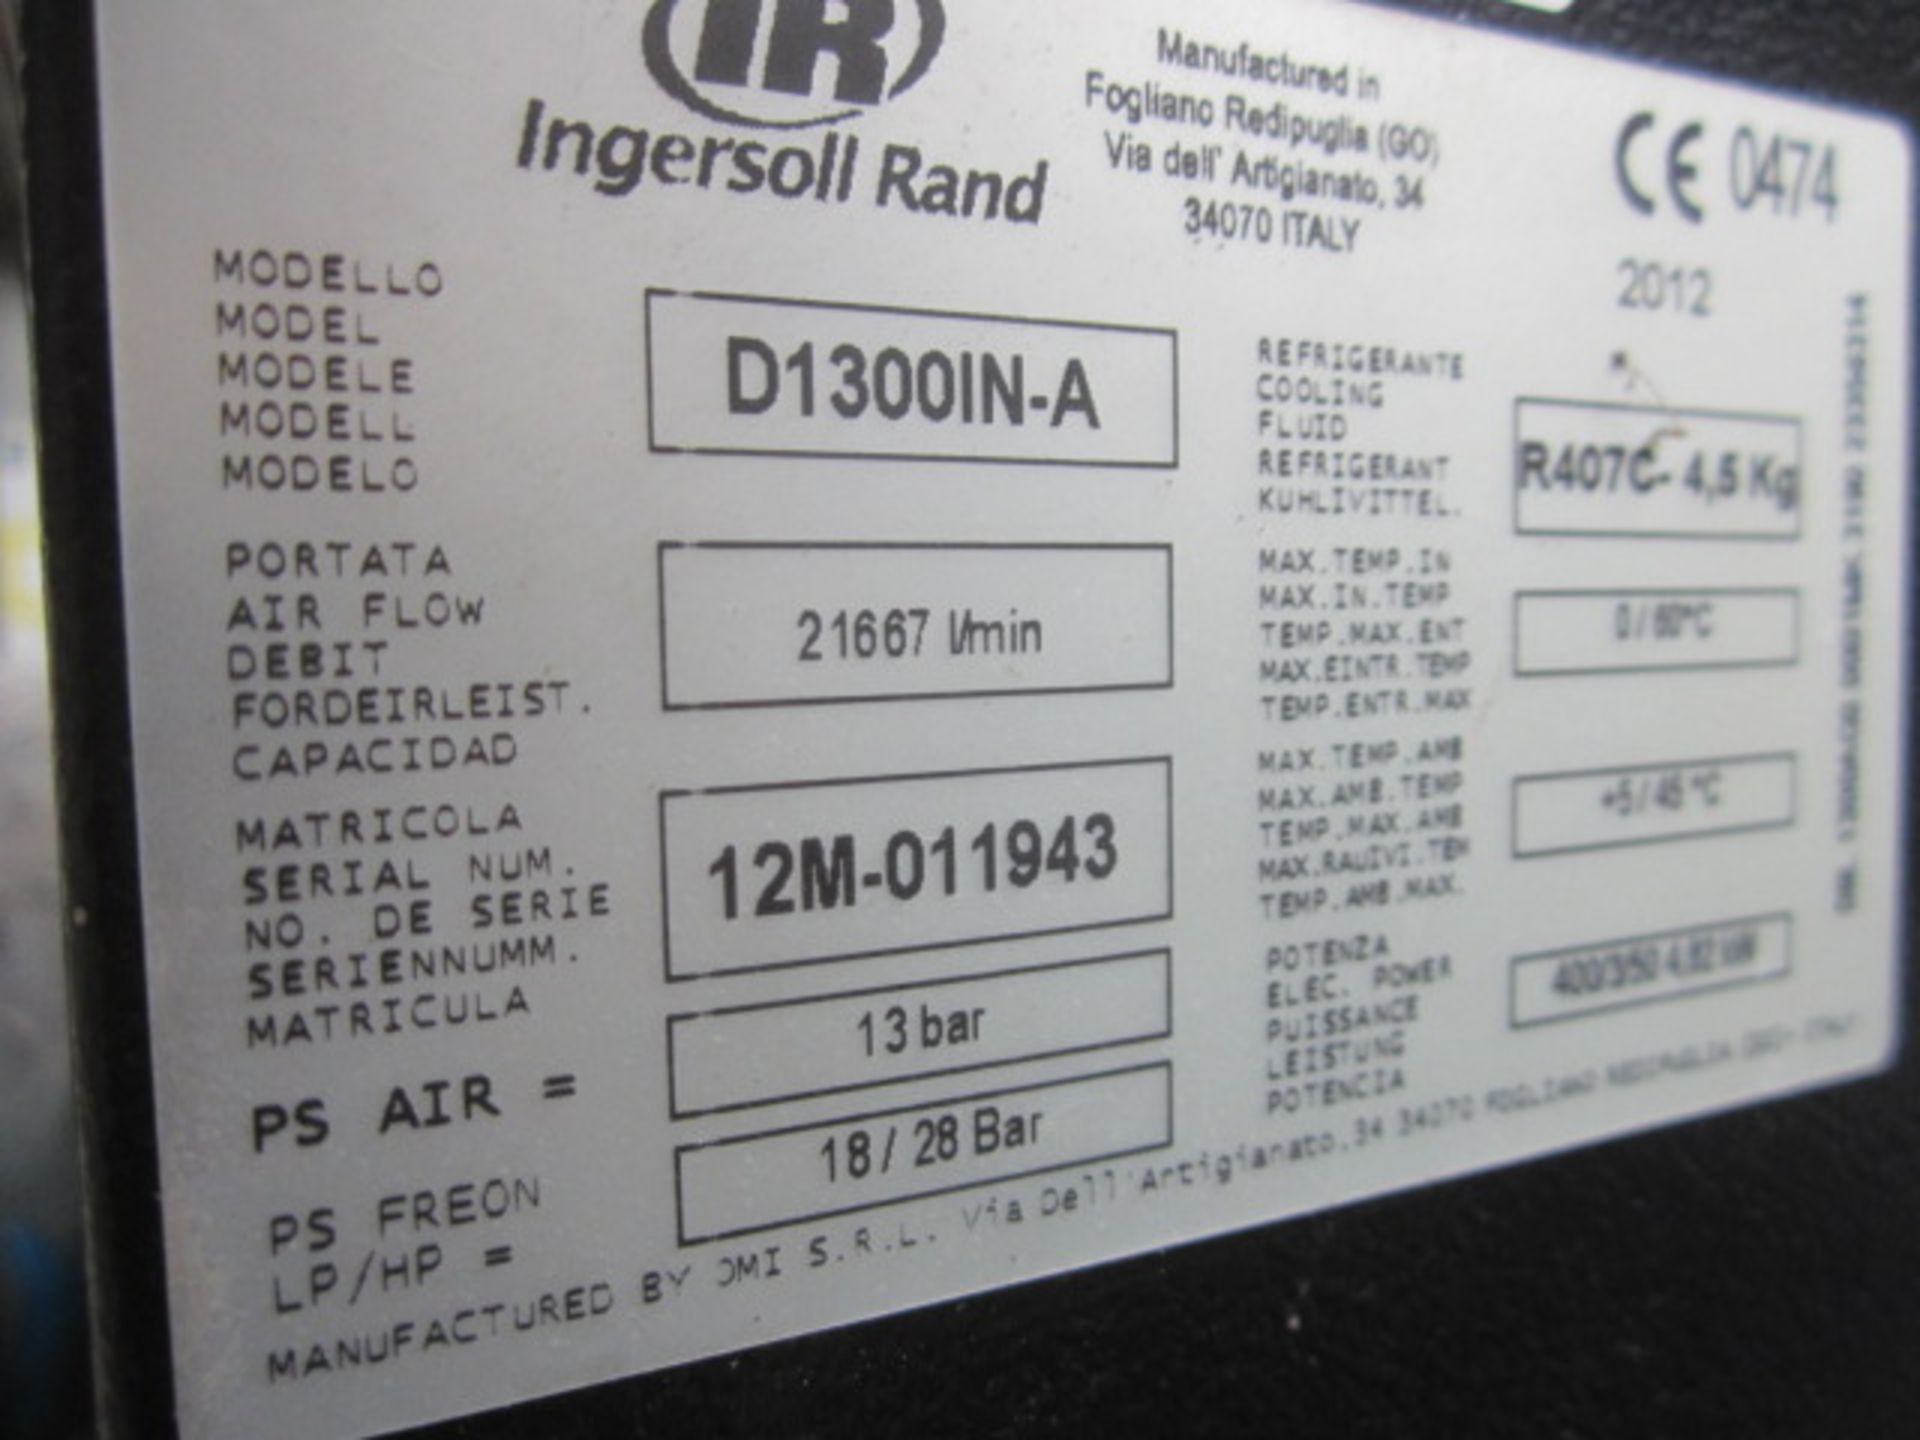 Ingersoll Rand D1300IN-A refrigerant dryer, serial no. 12M-011943 (2012) - Image 4 of 6